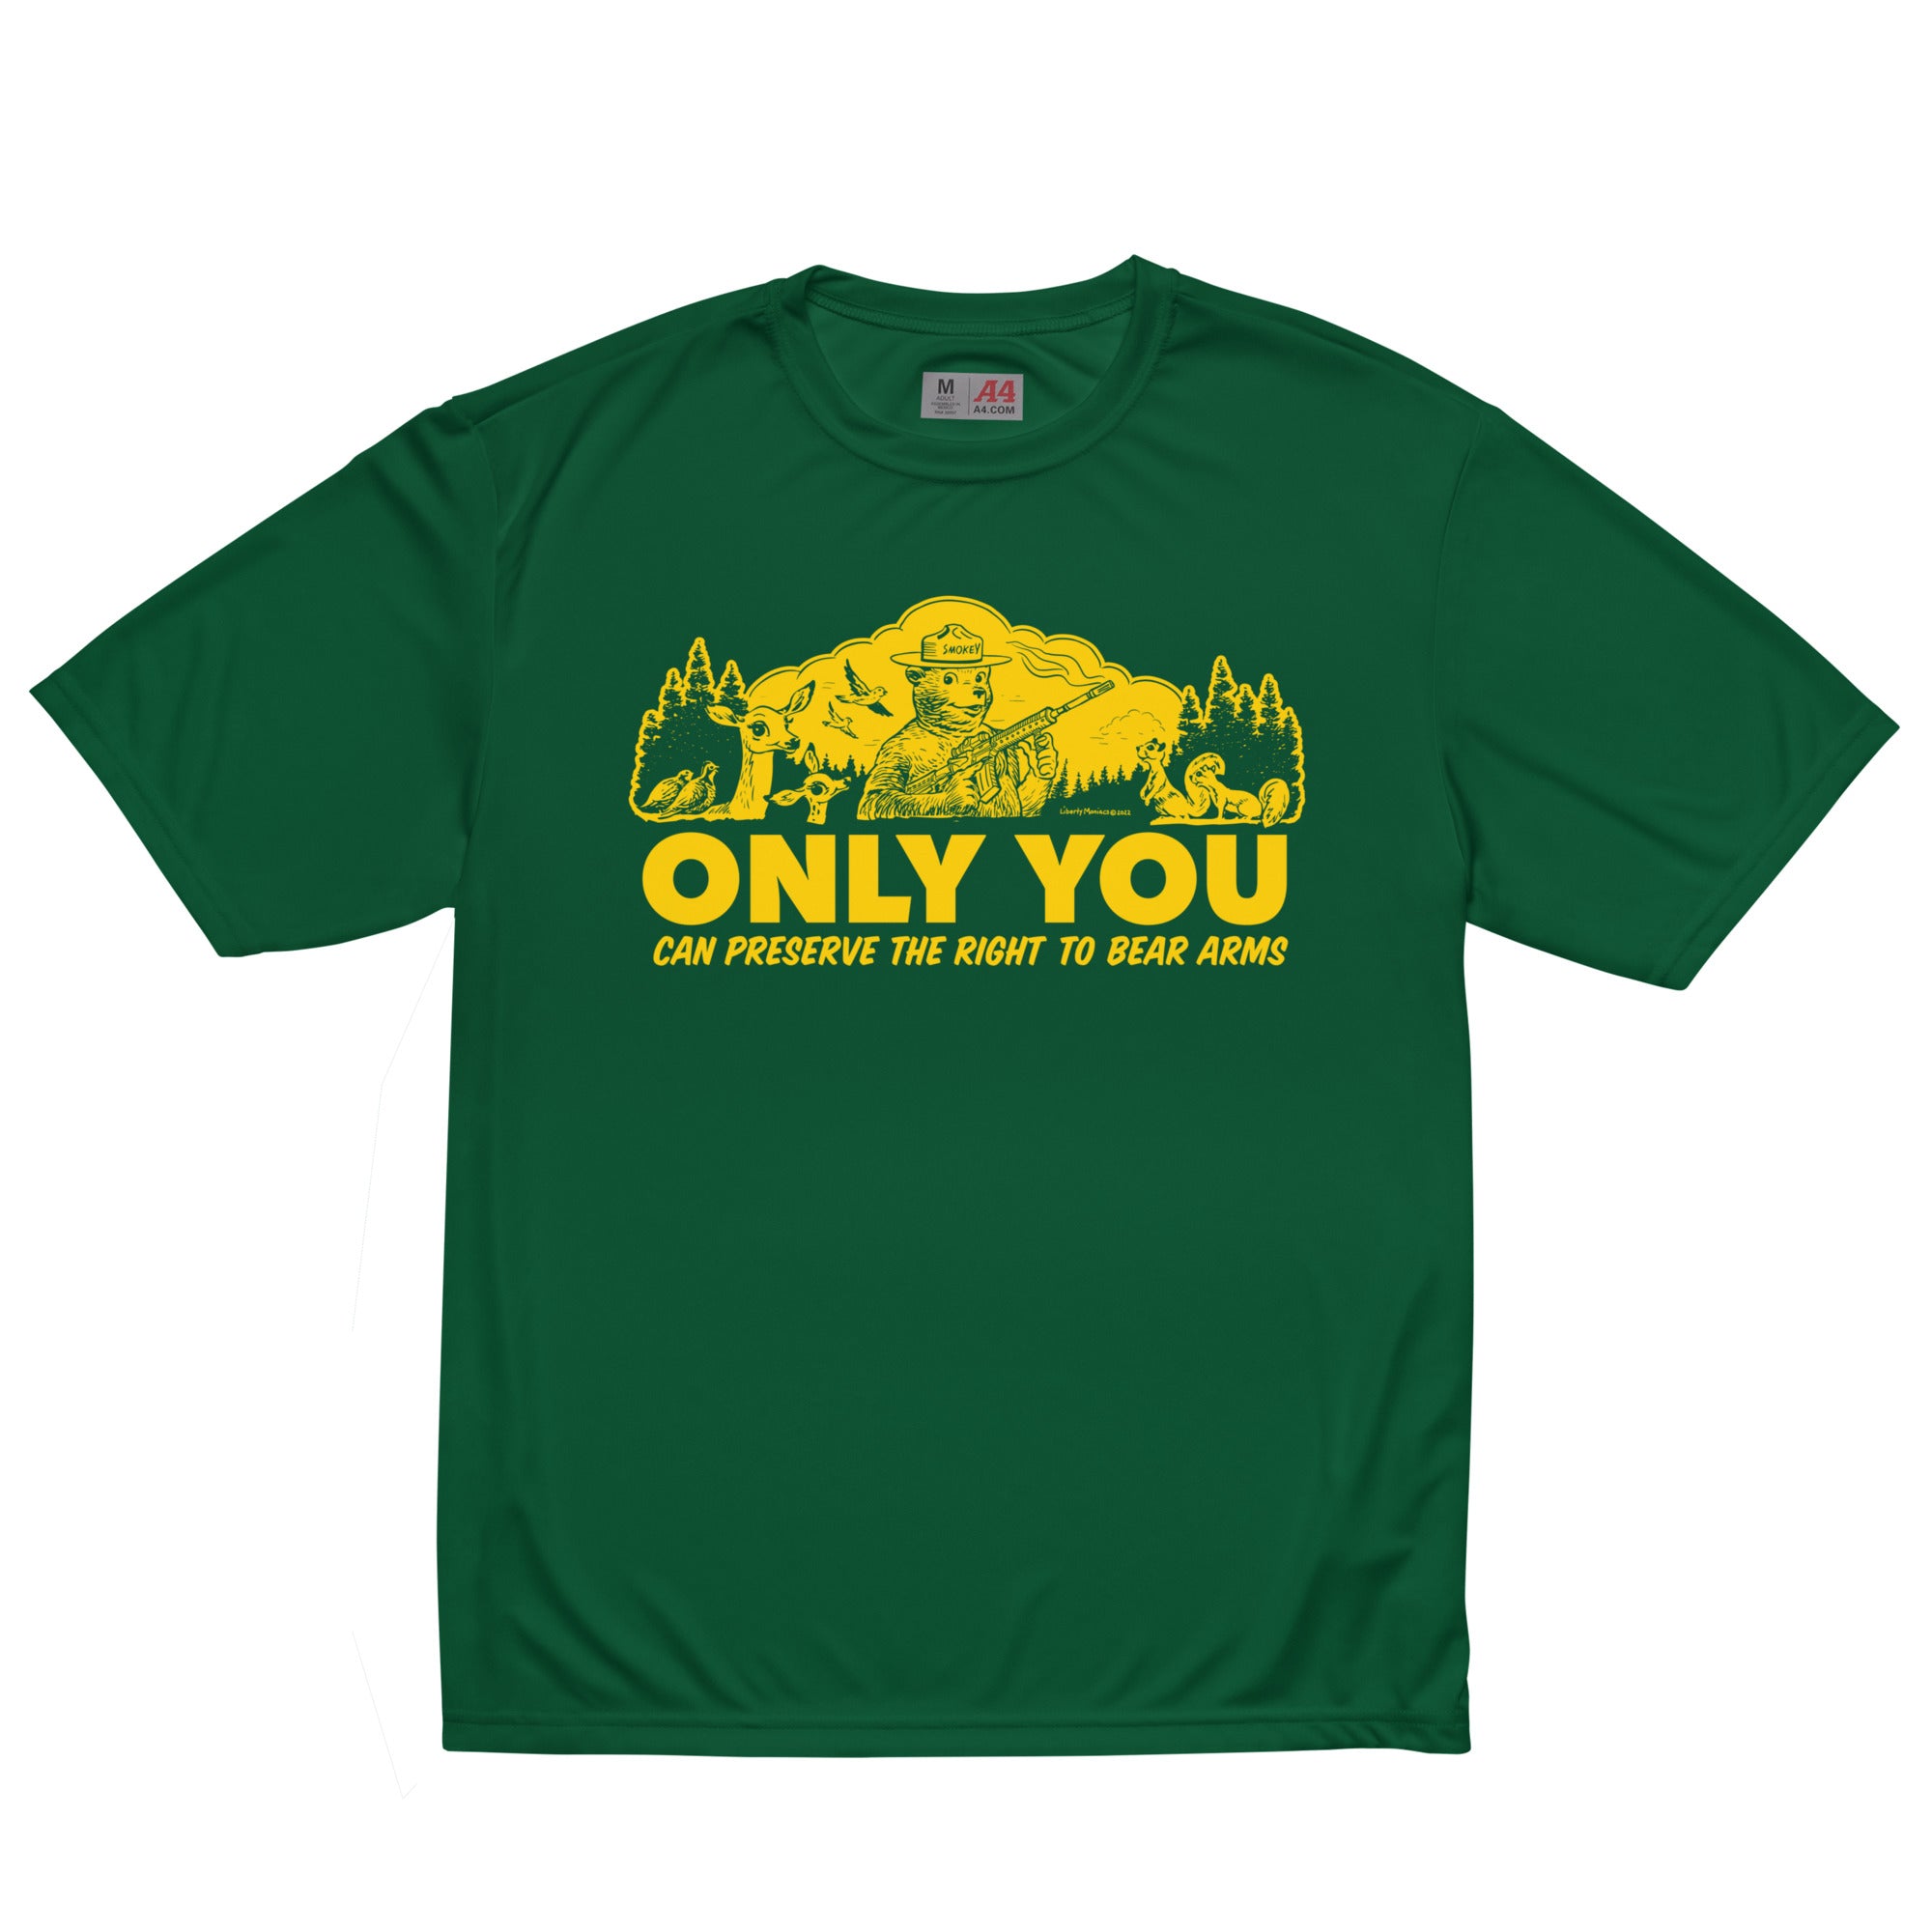 Only You Can Preserve the Right To Bear Arms Performance Shirt